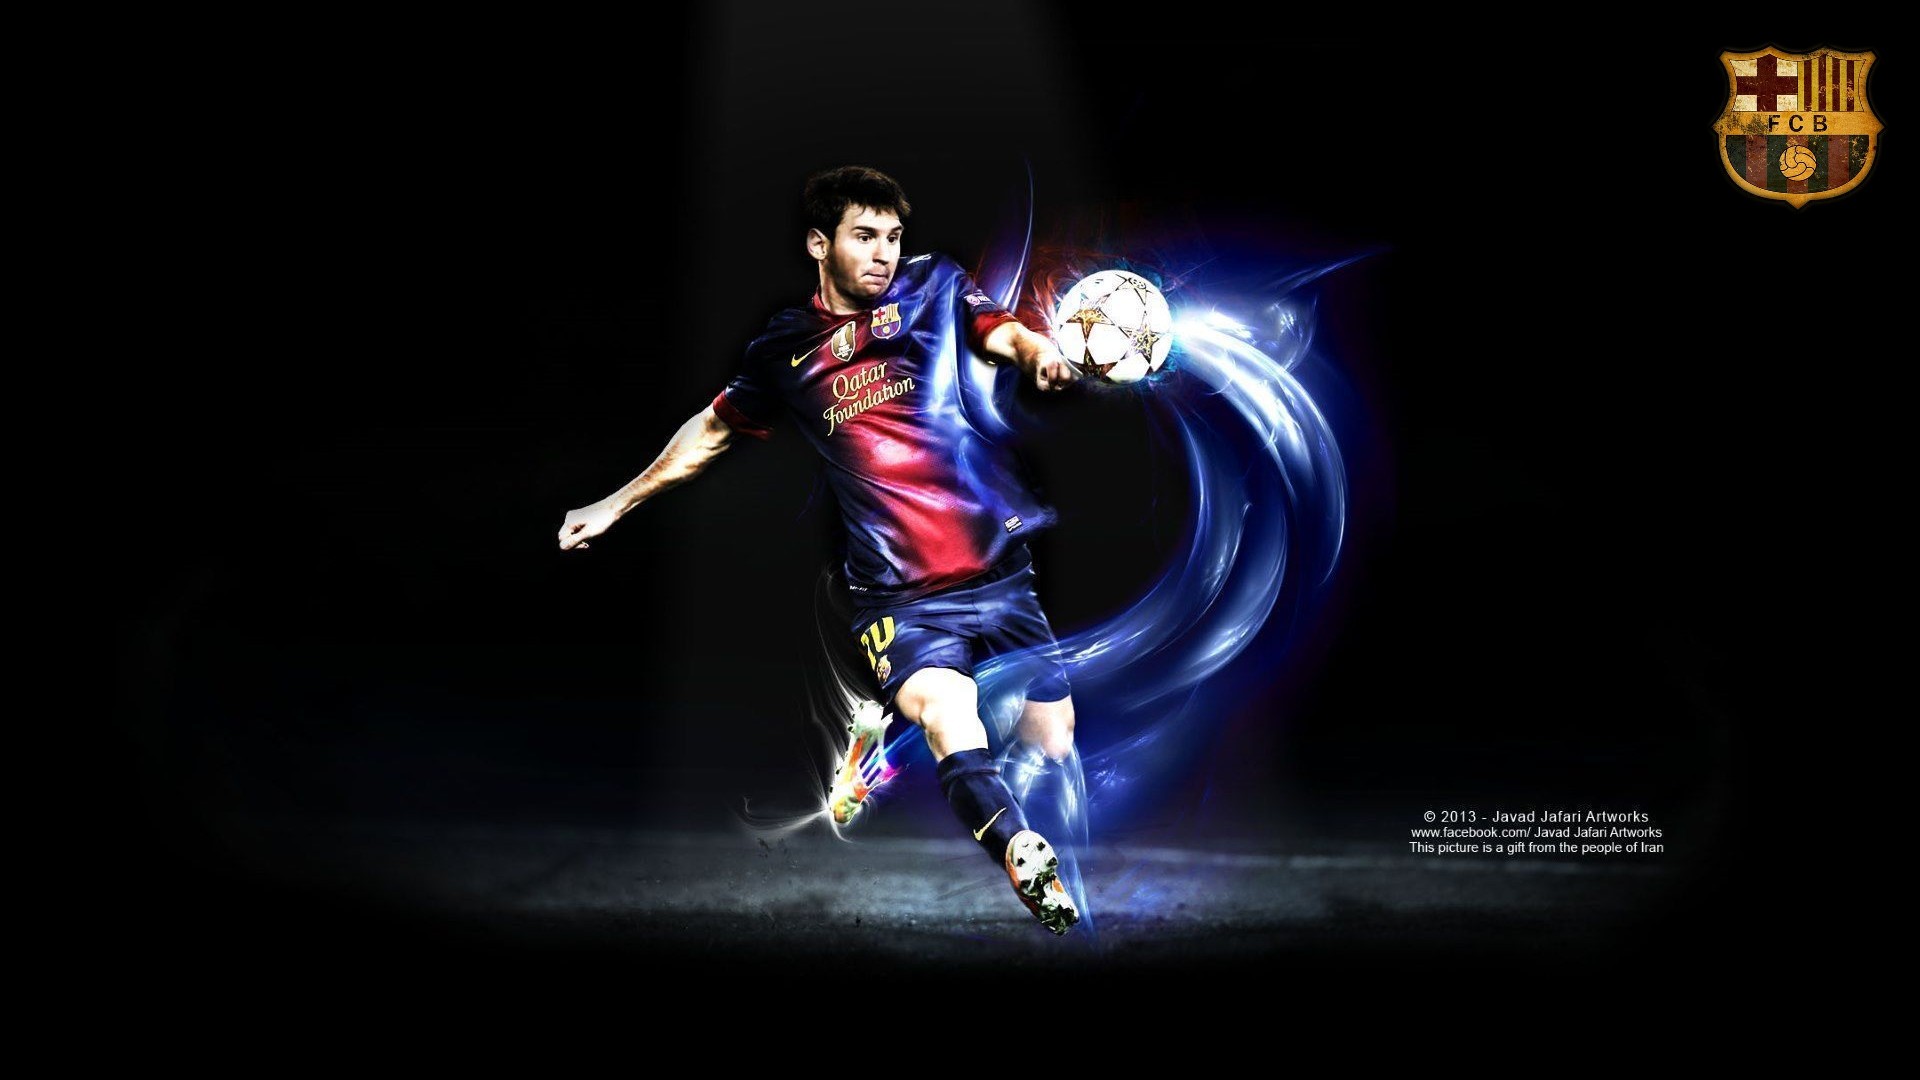 Wallpapers Messi With Resolution 1920X1080 pixel. You can make this wallpaper for your Mac or Windows Desktop Background, iPhone, Android or Tablet and another Smartphone device for free